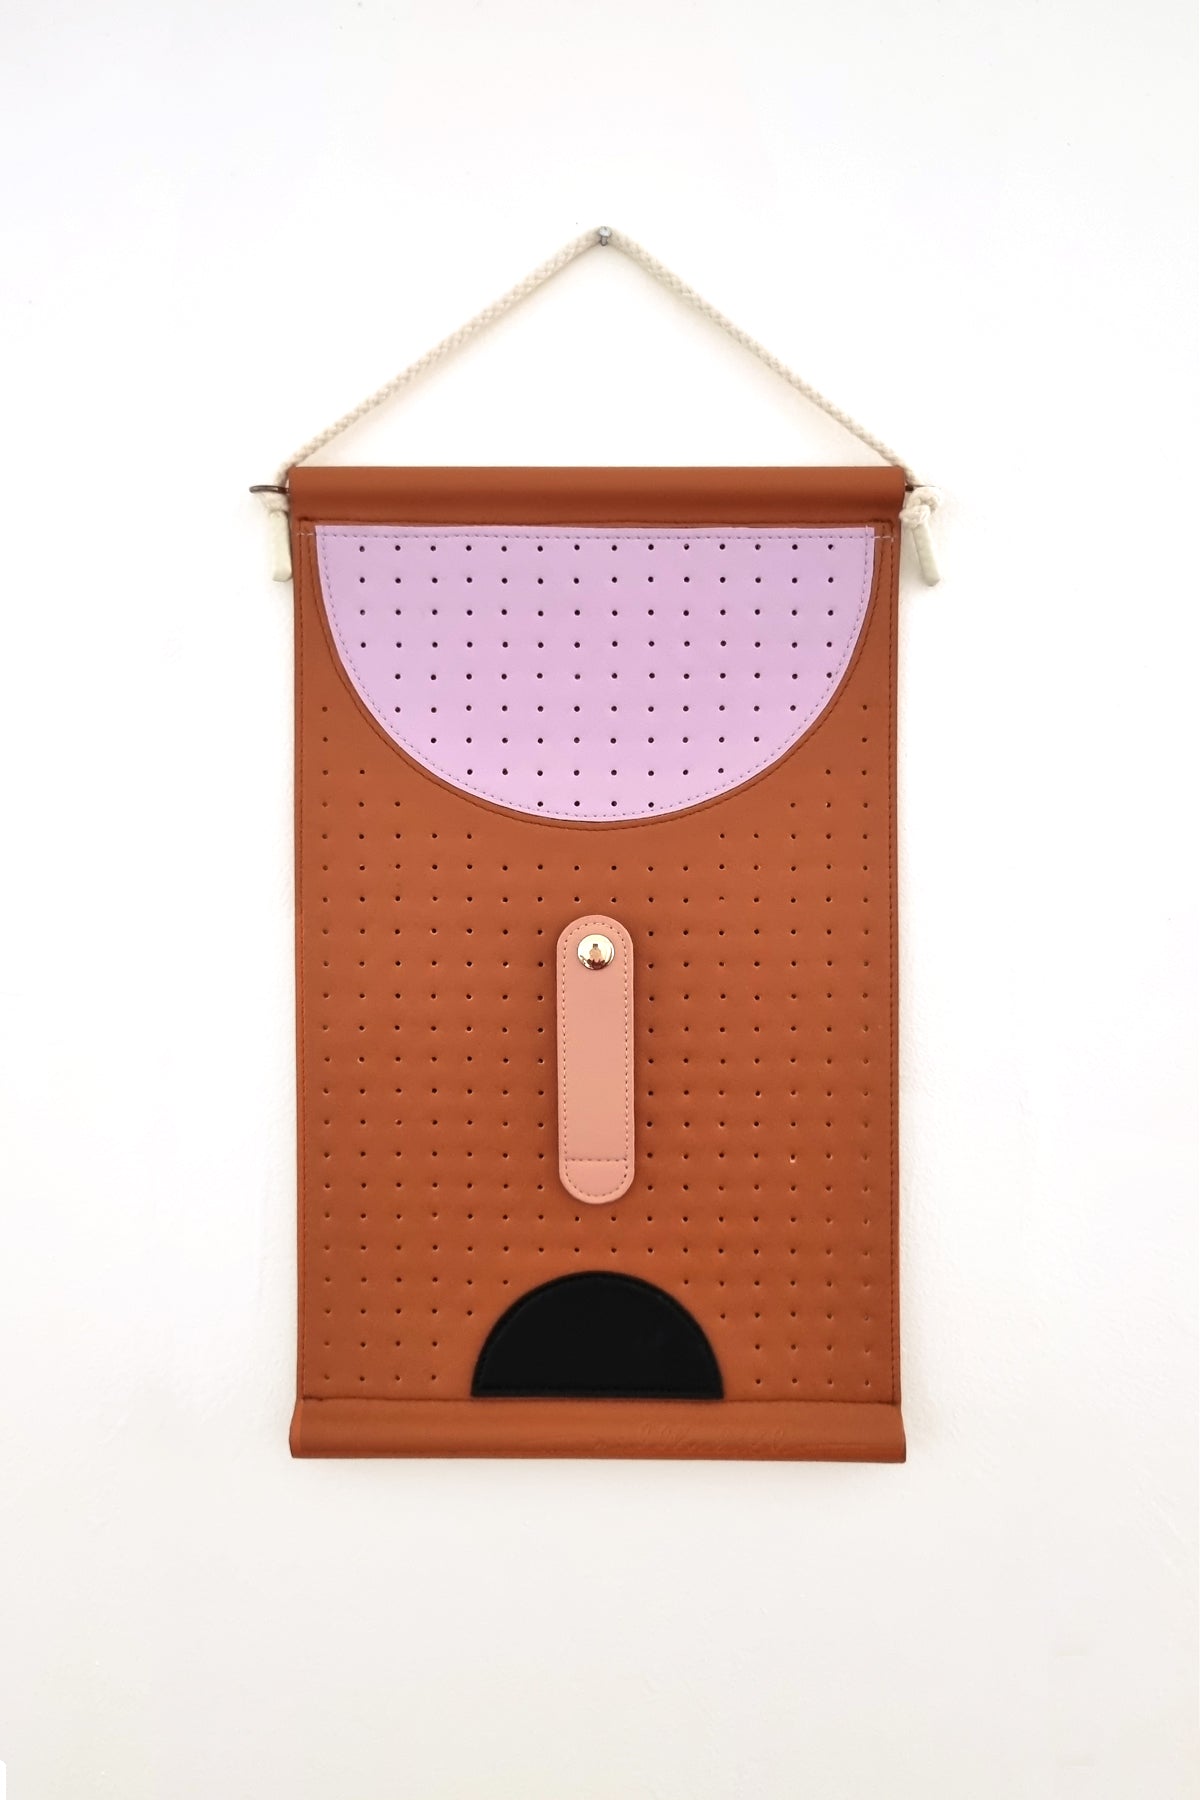 A perforated tan wall hanging is hung by a rope against a white wall. The wall hanging features a large perforated lilac half circle at the top, a peach elongated oval stitched to the middle with a gold button clasp, and below is a black half circle. 